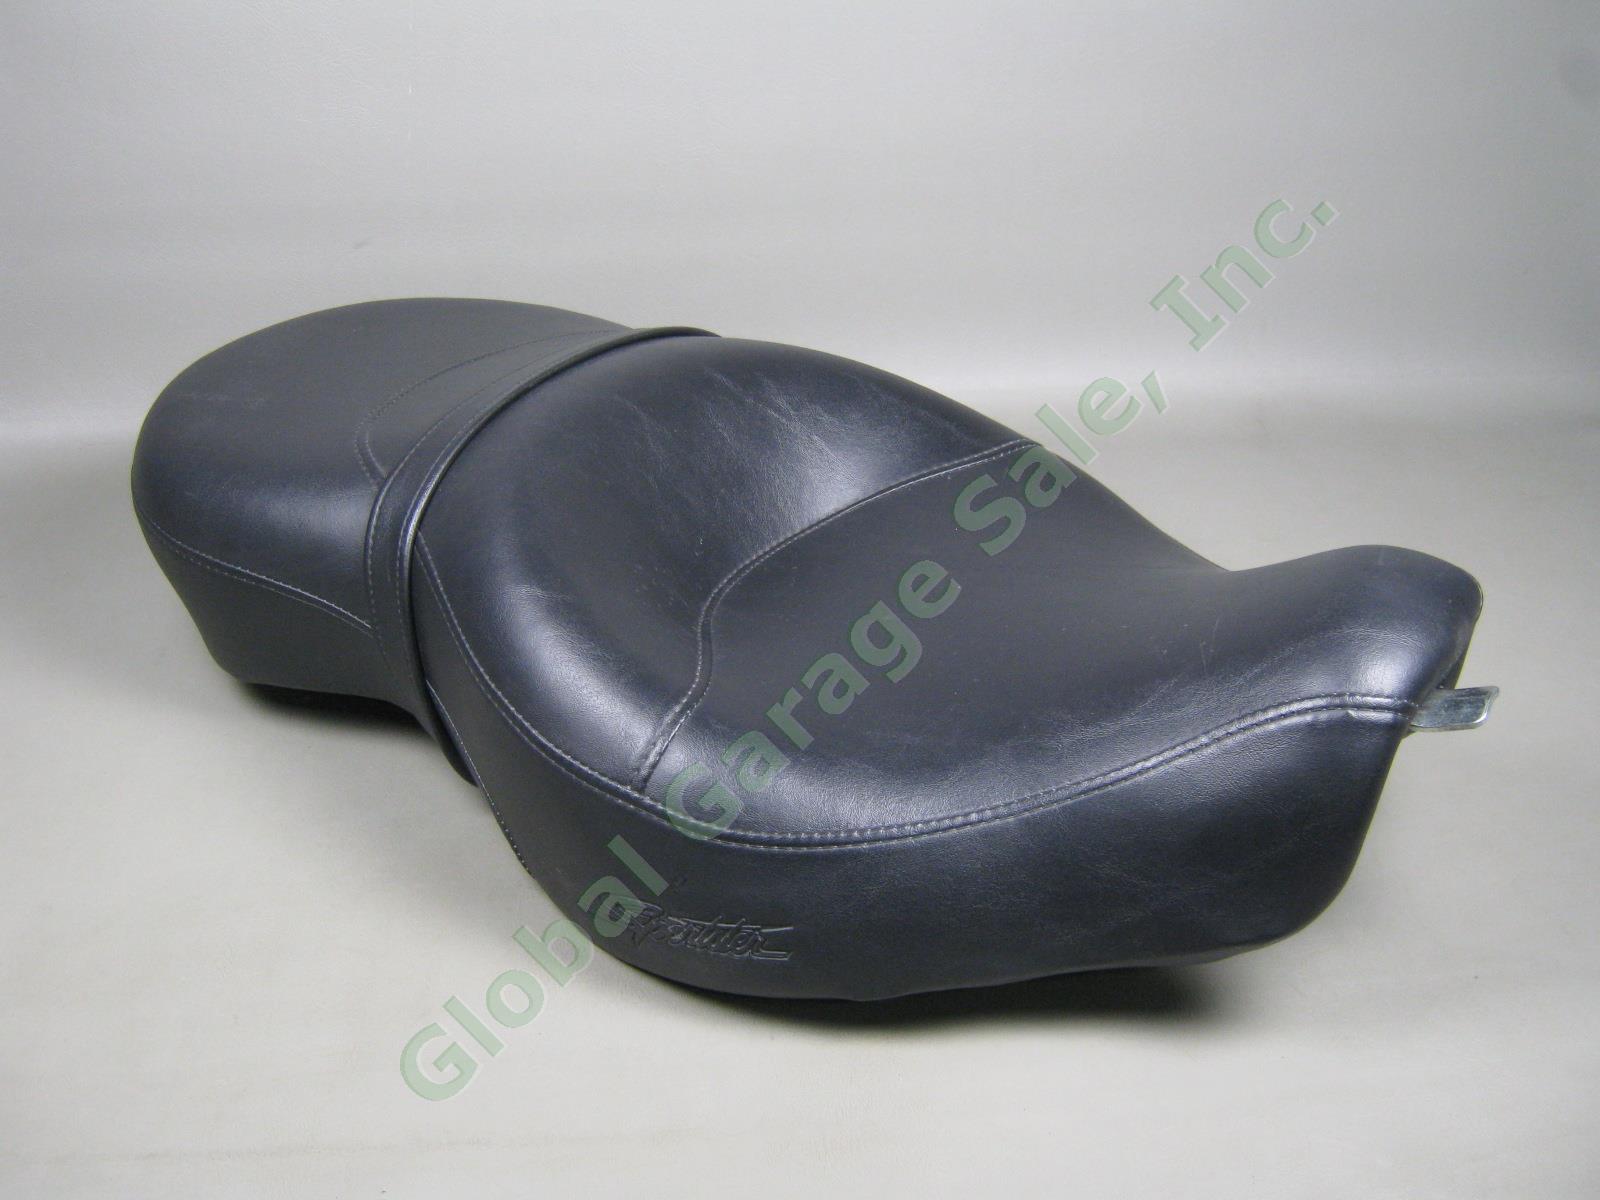 OEM Stock Harley-Davidson Sportster Touring Motorcycle Seat RDW-92/61-0067 Used